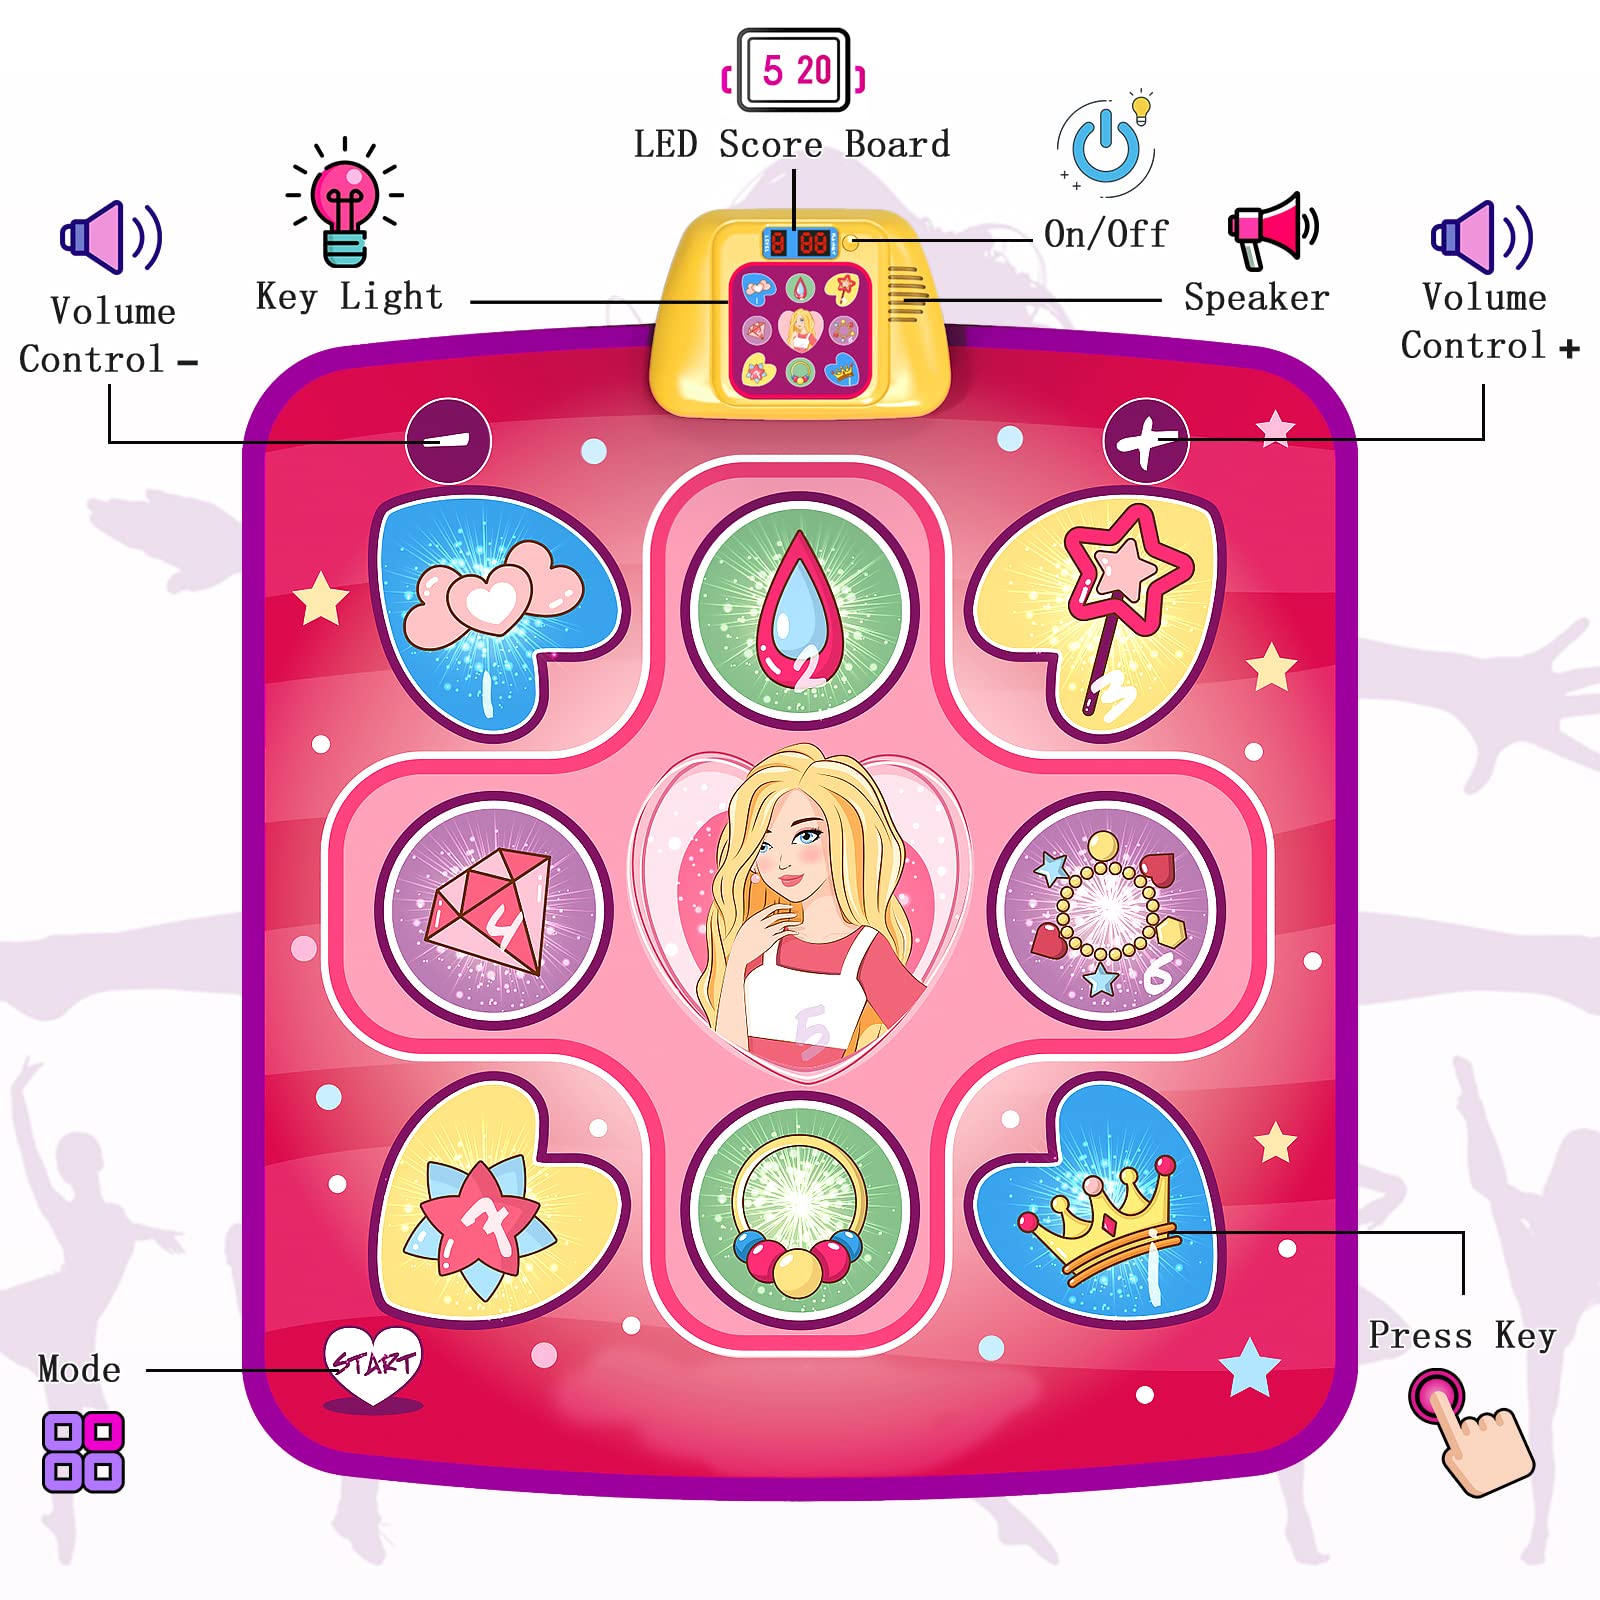 beefunni Dance Mat, Girls Toy Gift for Ages 3 4 5 6 7+, LED Dance Pad with 5 Fun Game Modes, Adjustable Volume, 3 Challenge Levels, Built-in Music, Birthday Gifts for 3 4 5 6 7+ Year Old Girls